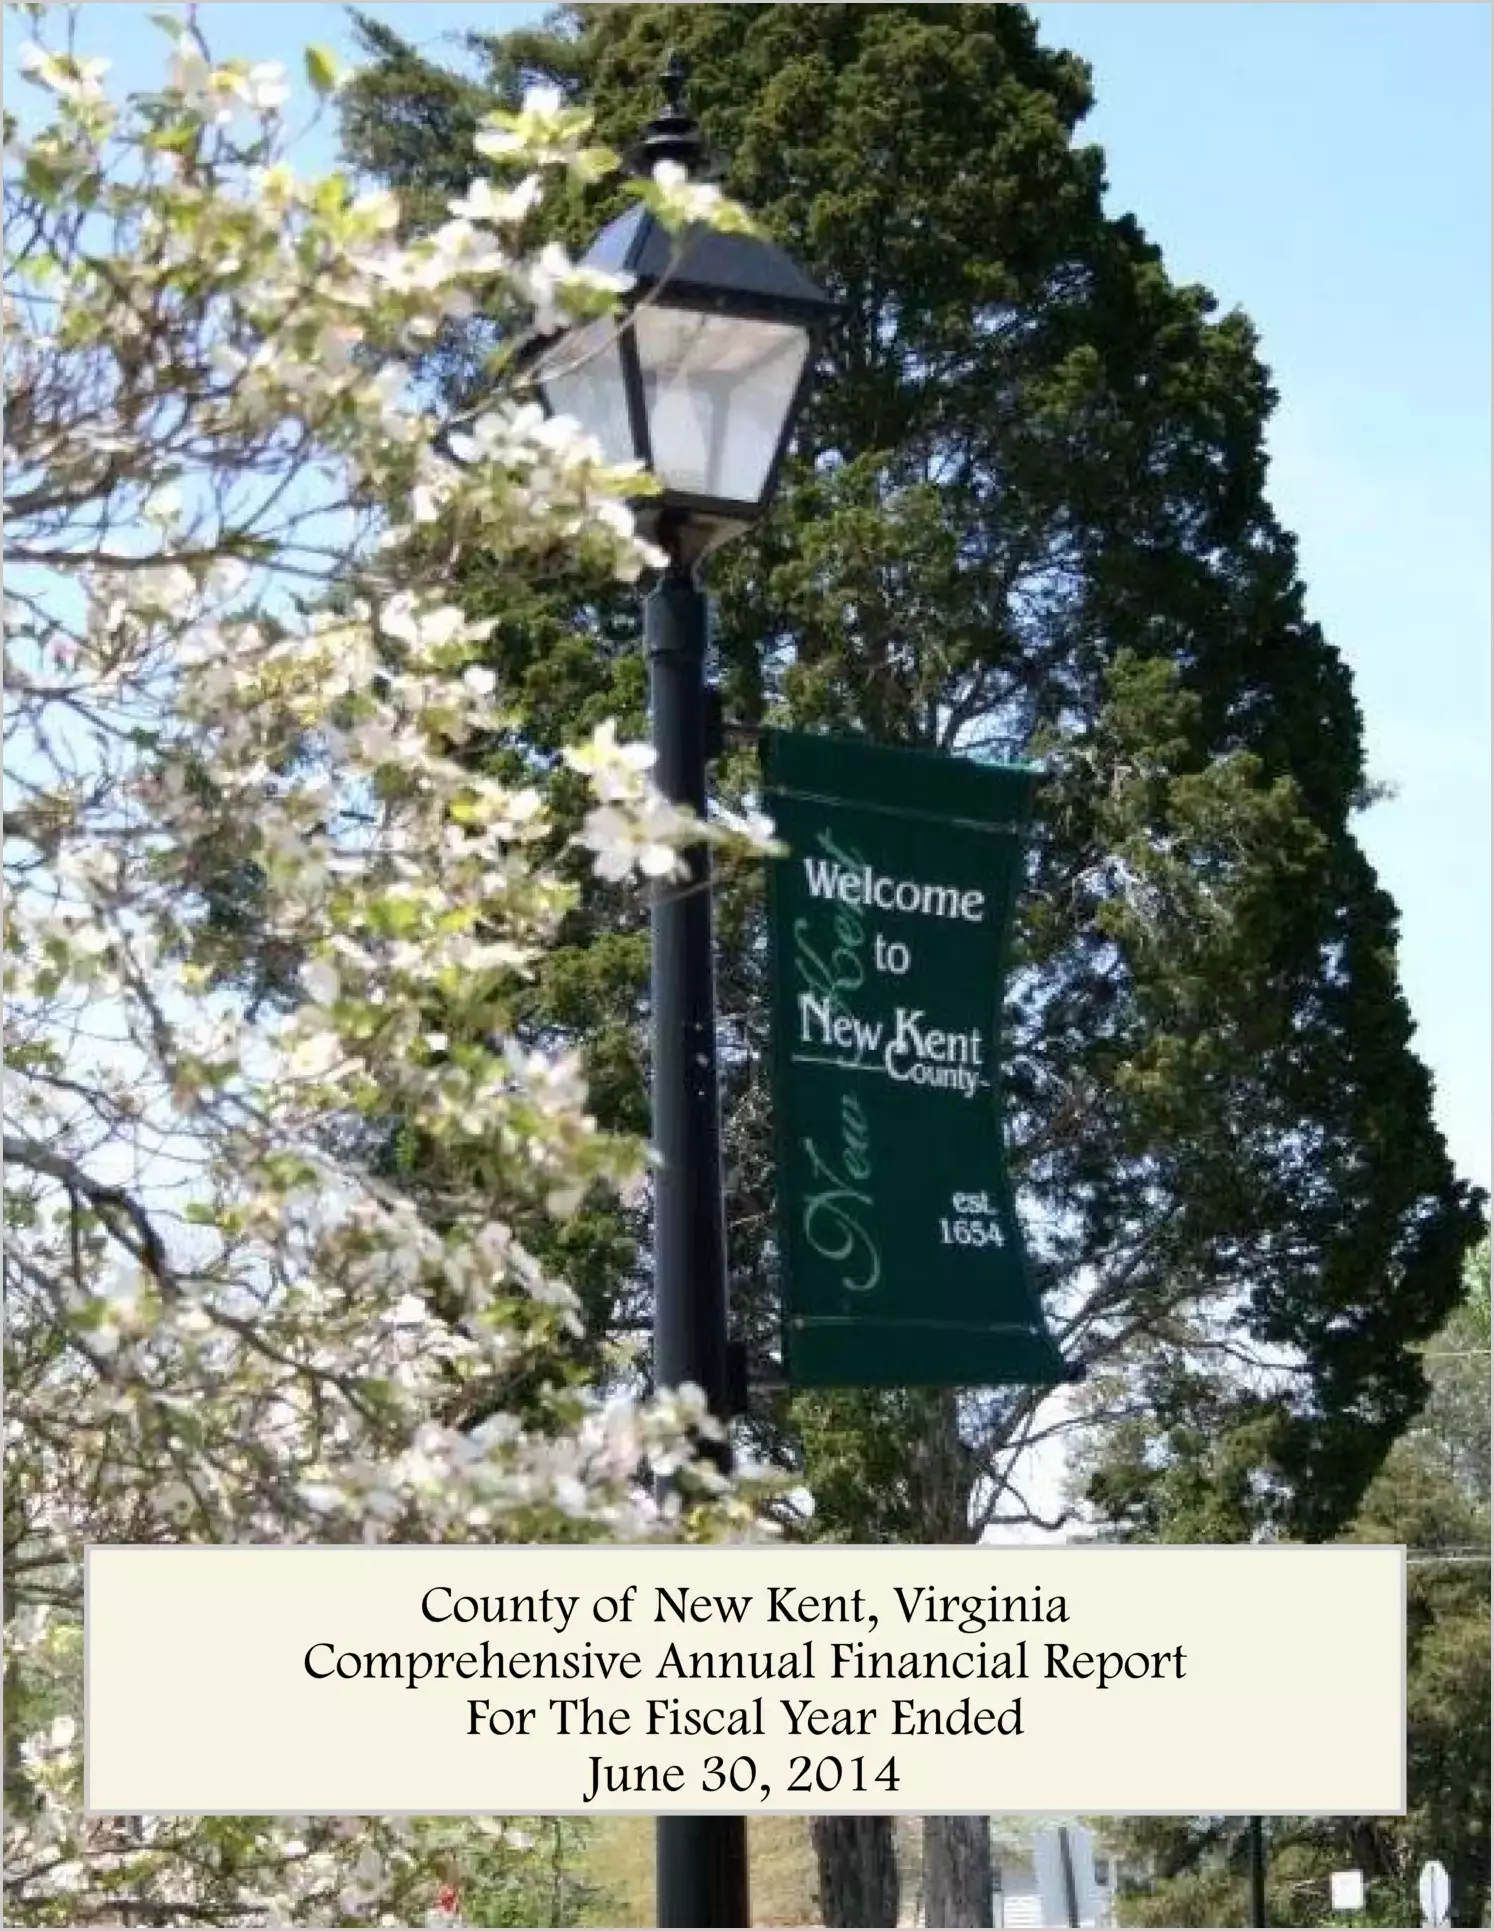 2014 Annual Financial Report for County of New Kent